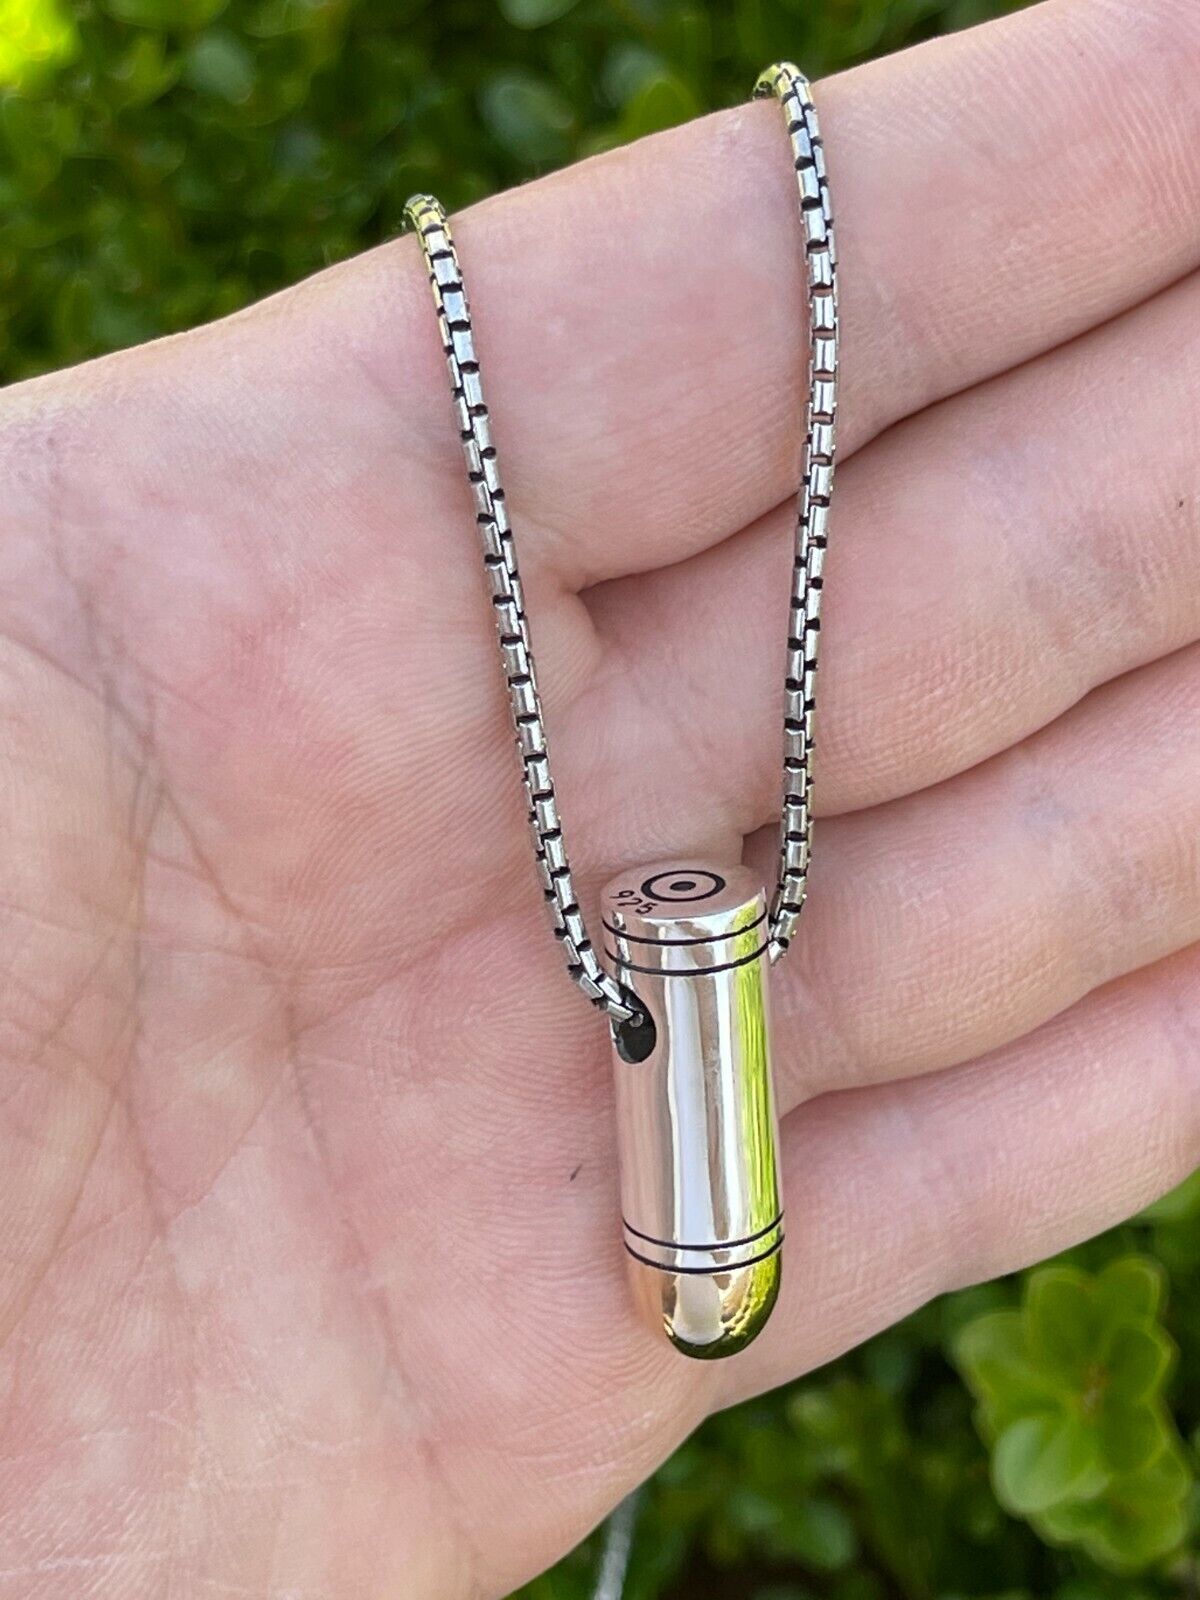 Real 925 Sterling Silver & 14k Gold Plated Bullet Pendant Necklace Chain 9mm Gun